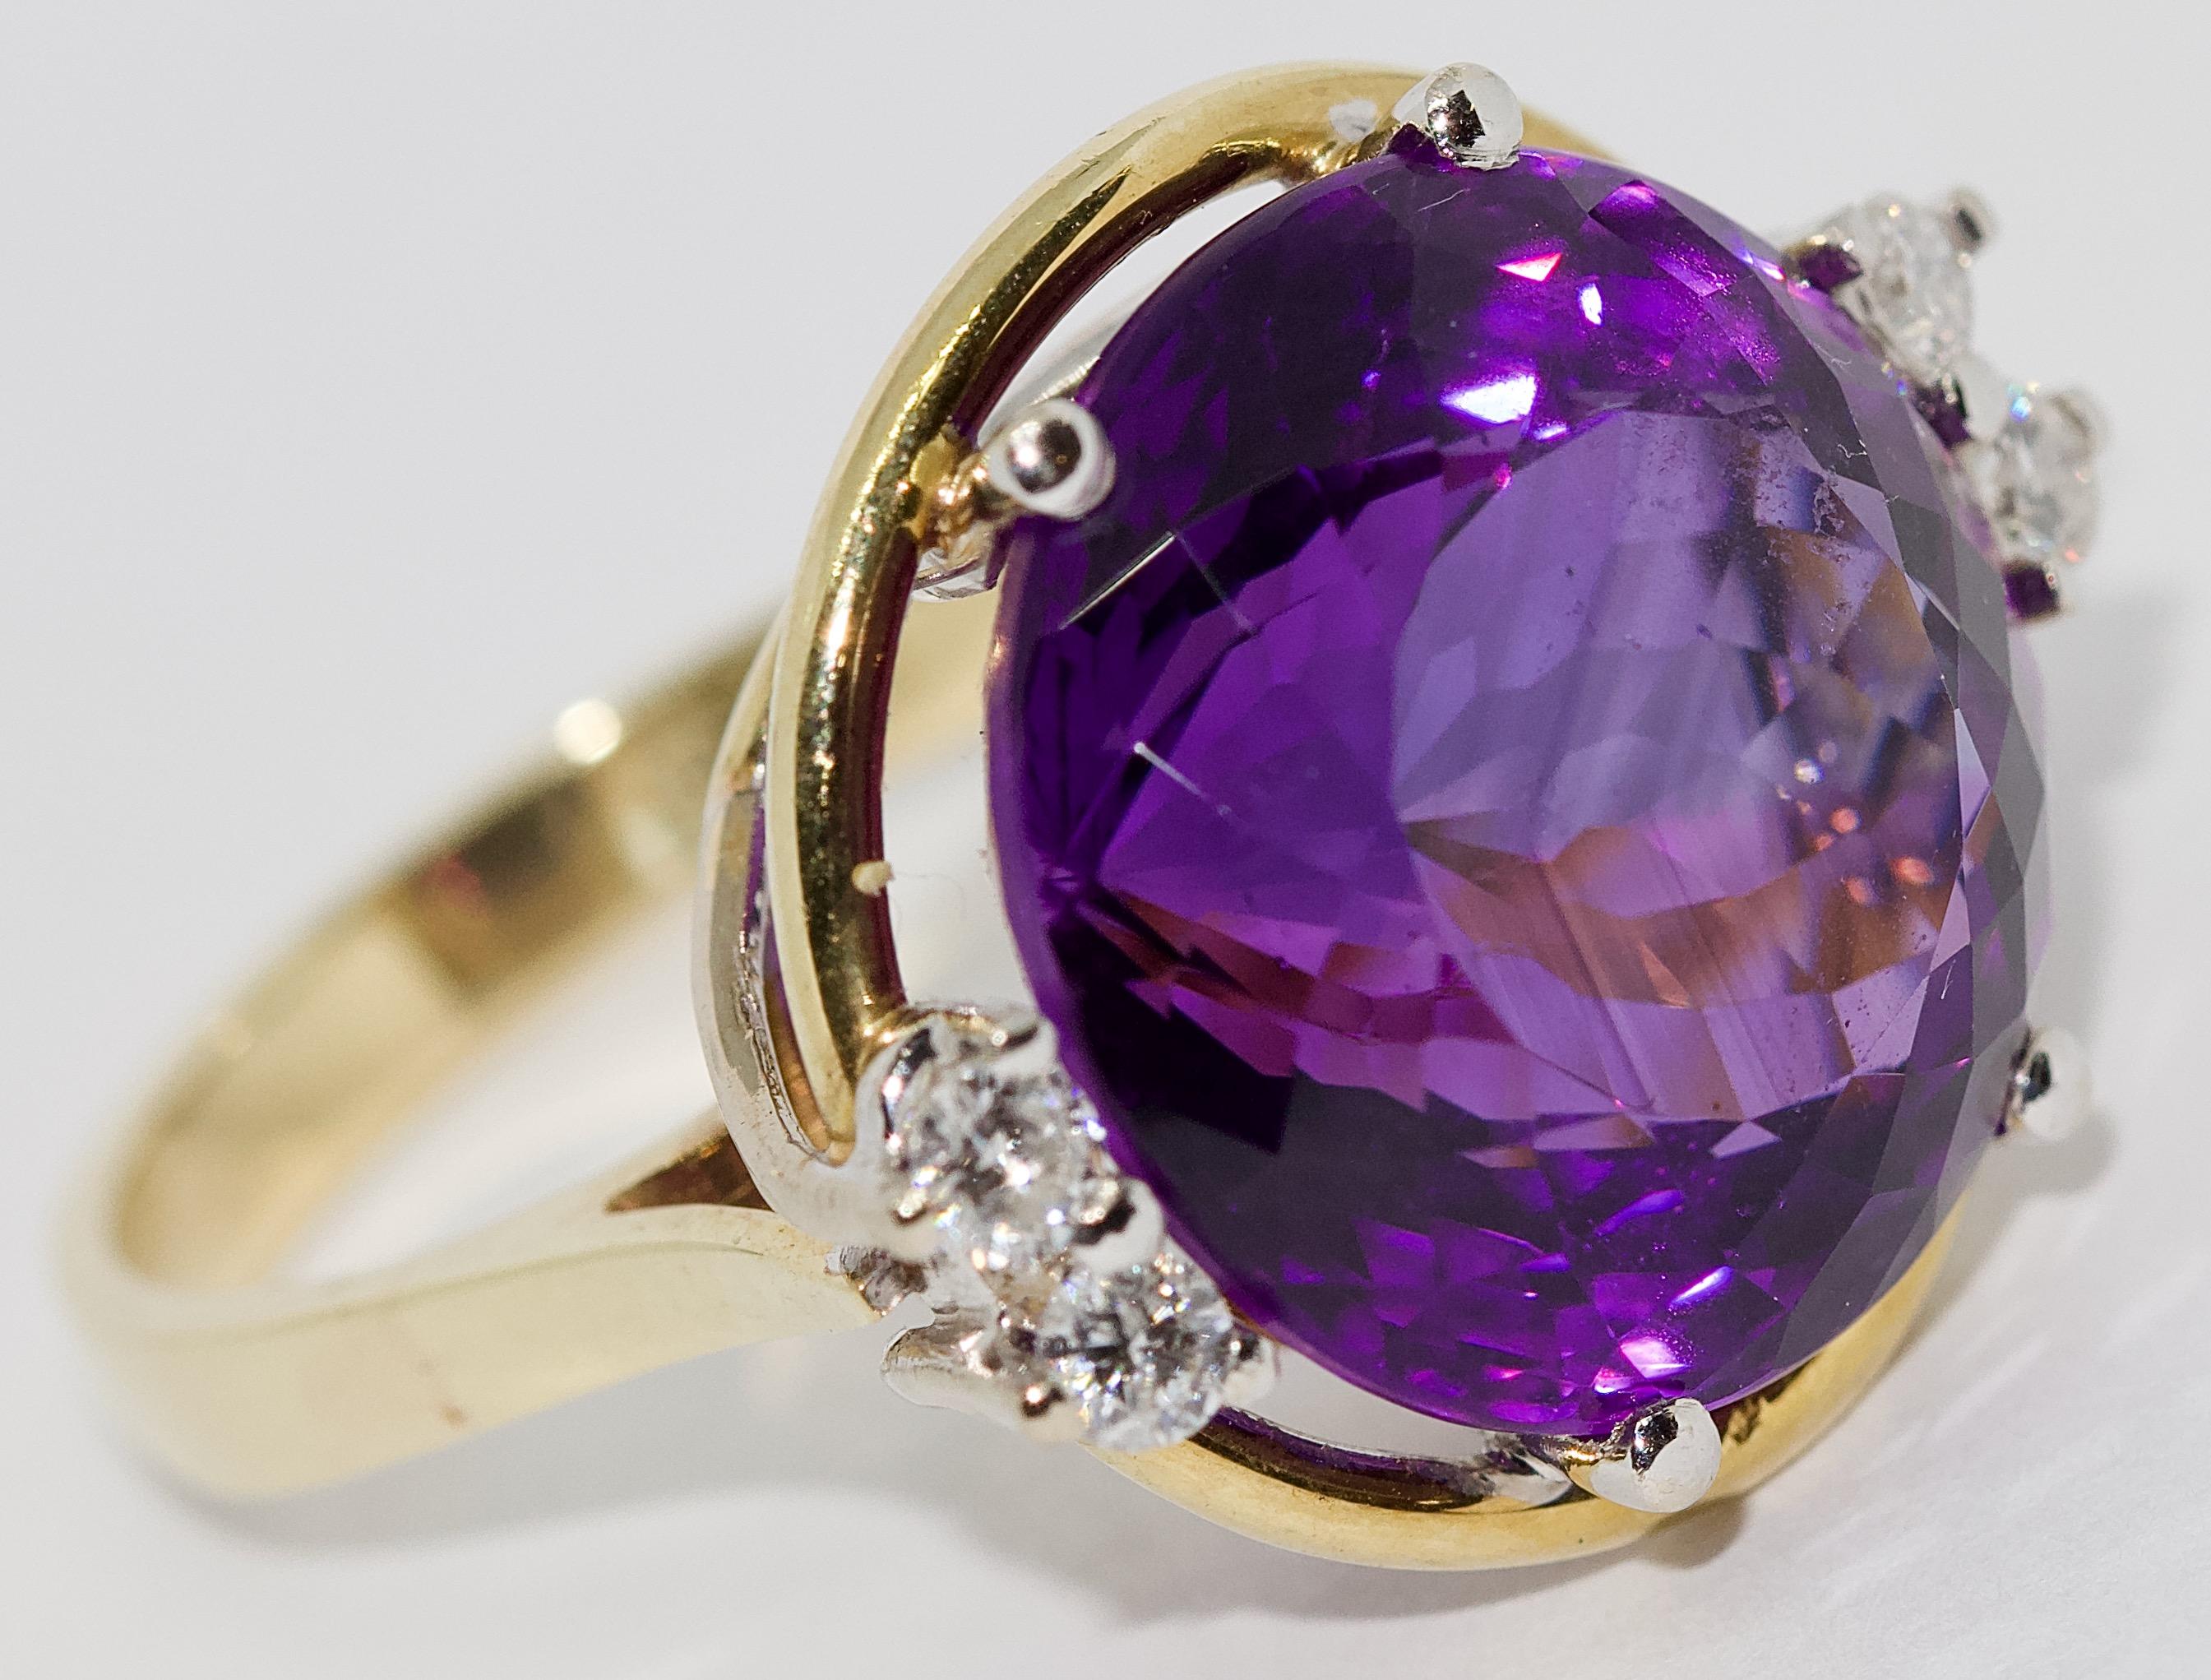 Eye-catching ladies' luxury ring, 14k gold with large faceted amethyst and diamonds.

Including certificate of authenticity.

US ring size 8.
On request we can adjust the ring size expertly.